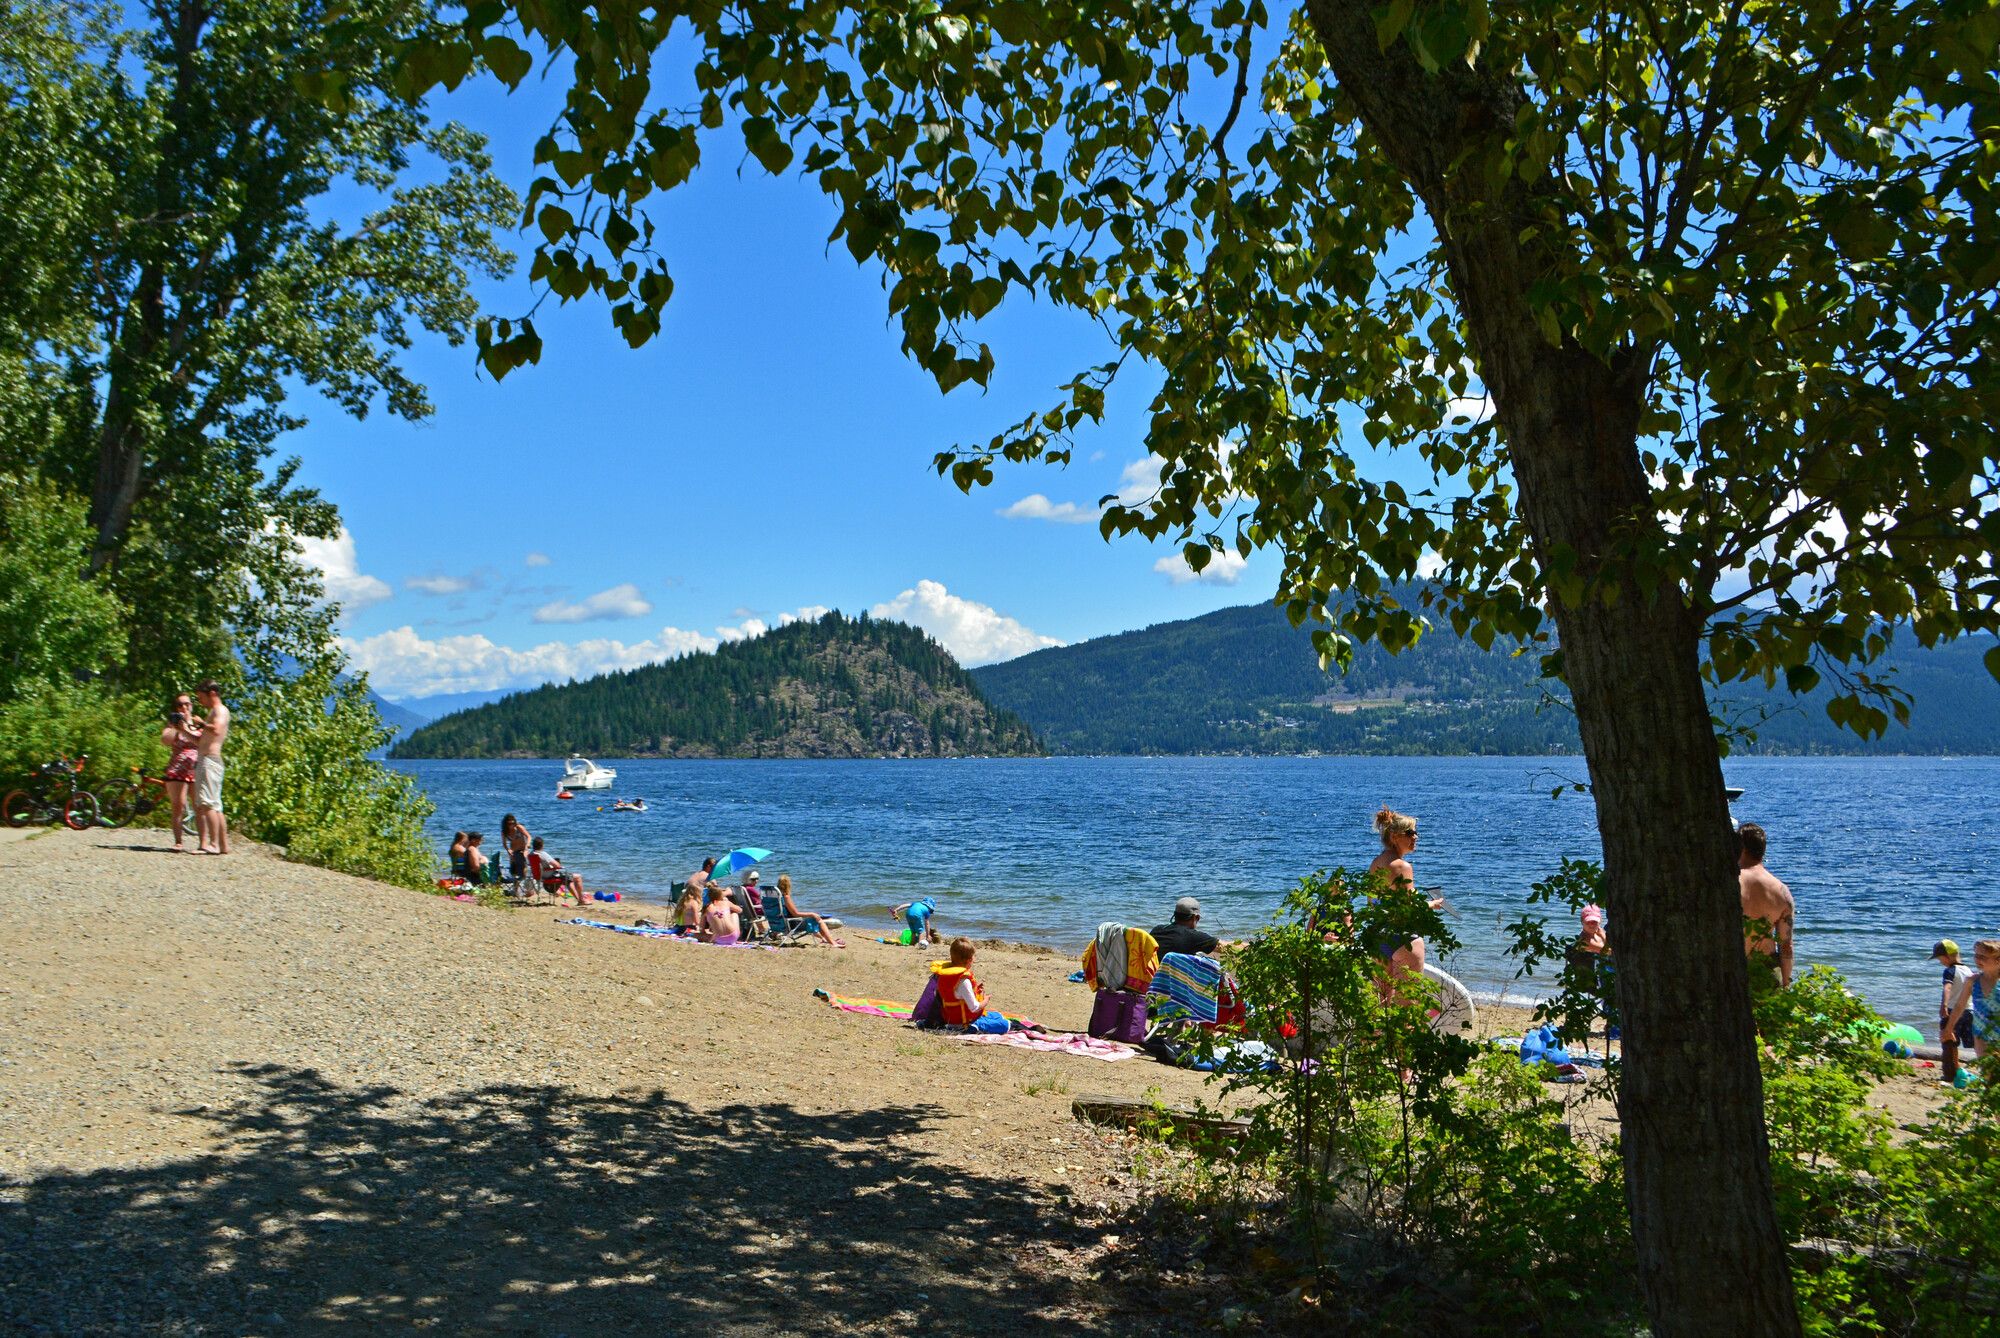 Families enjoying the day-use beach area at Shuswap Lake Park.